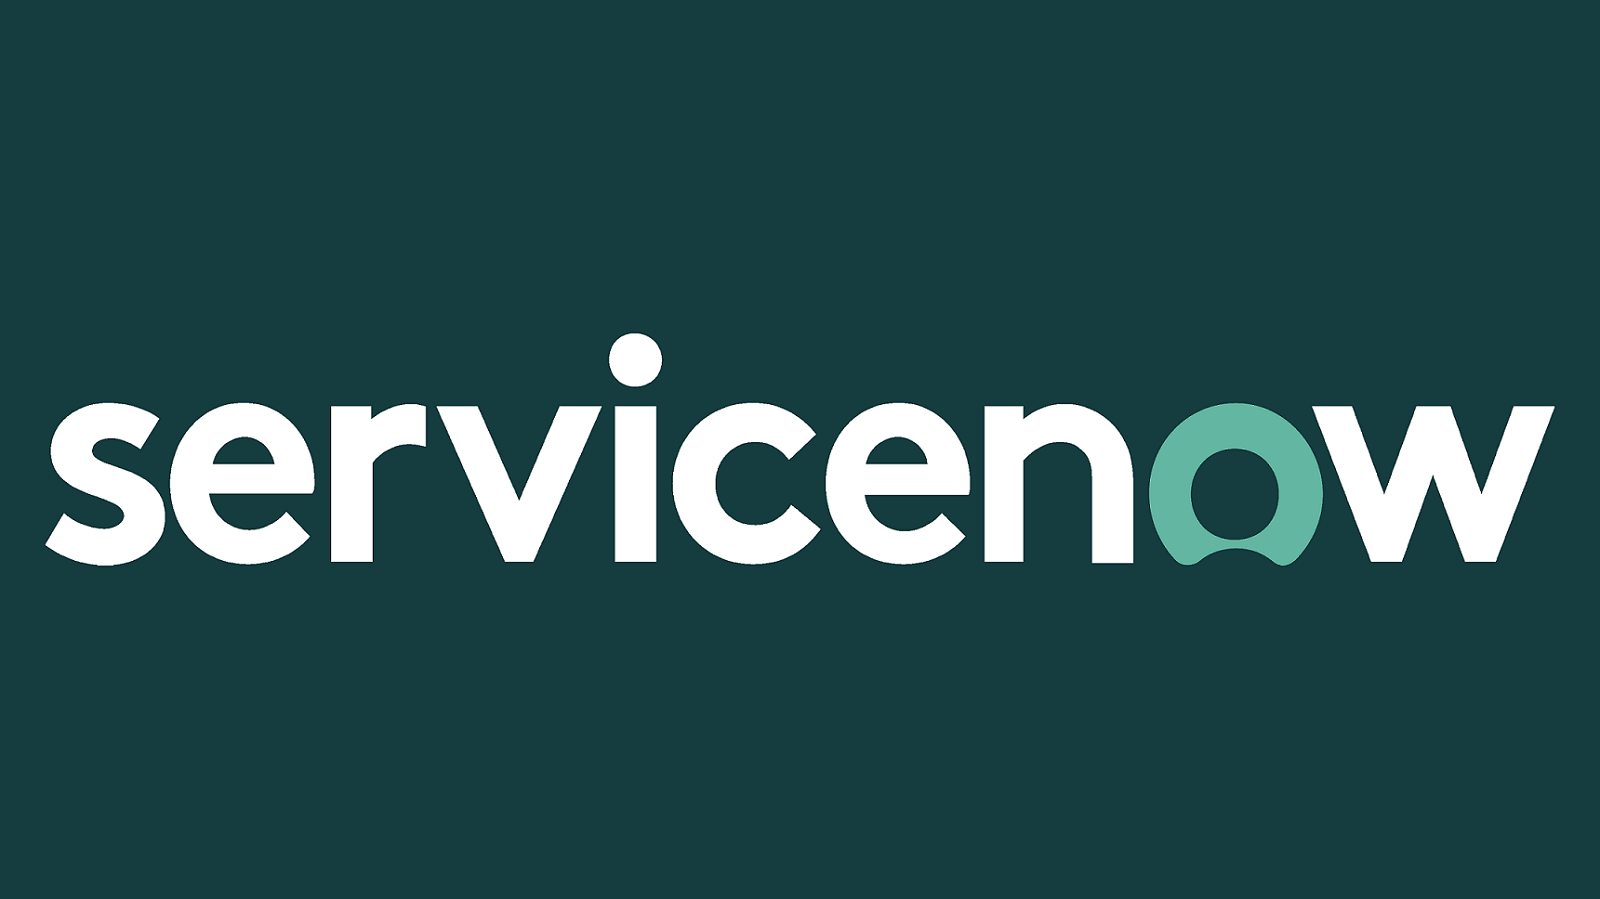 ServiceNow Recruitment 2022 Hiring Entry Level Software Engineers